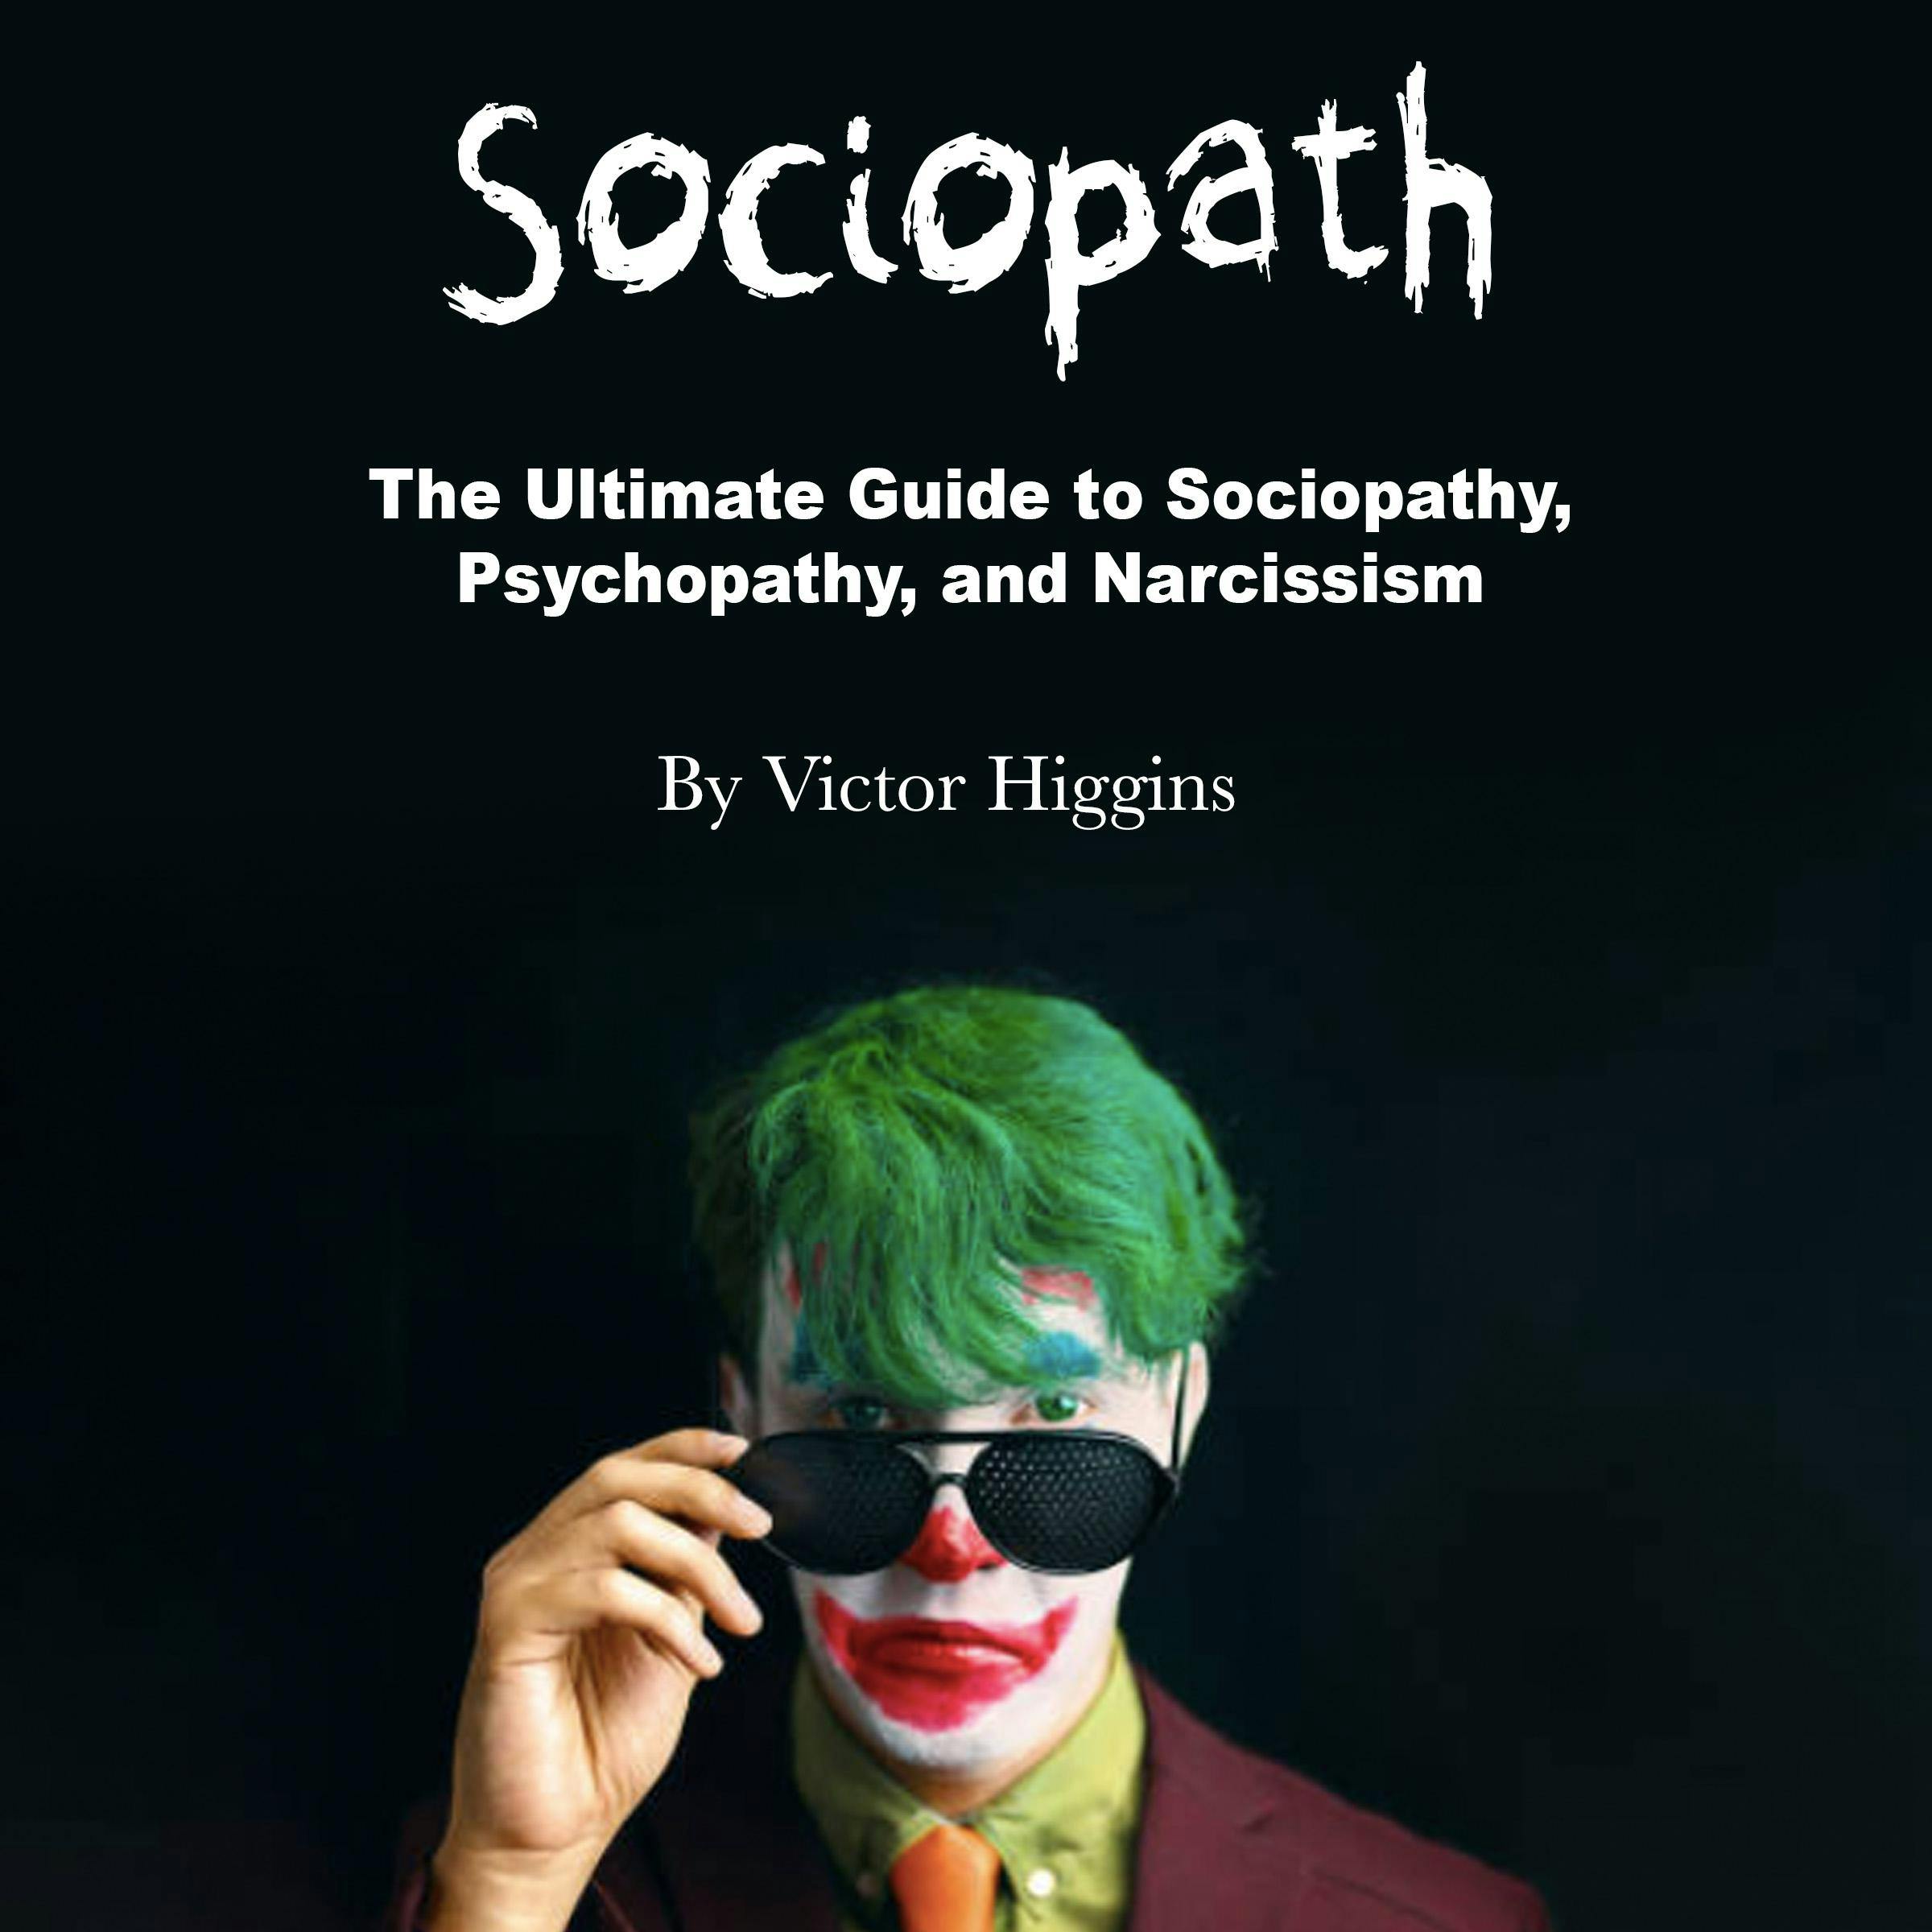 Sociopath: The Ultimate Guide to Sociopathy, Psychopathy, and Narcissism - Victor Higgins